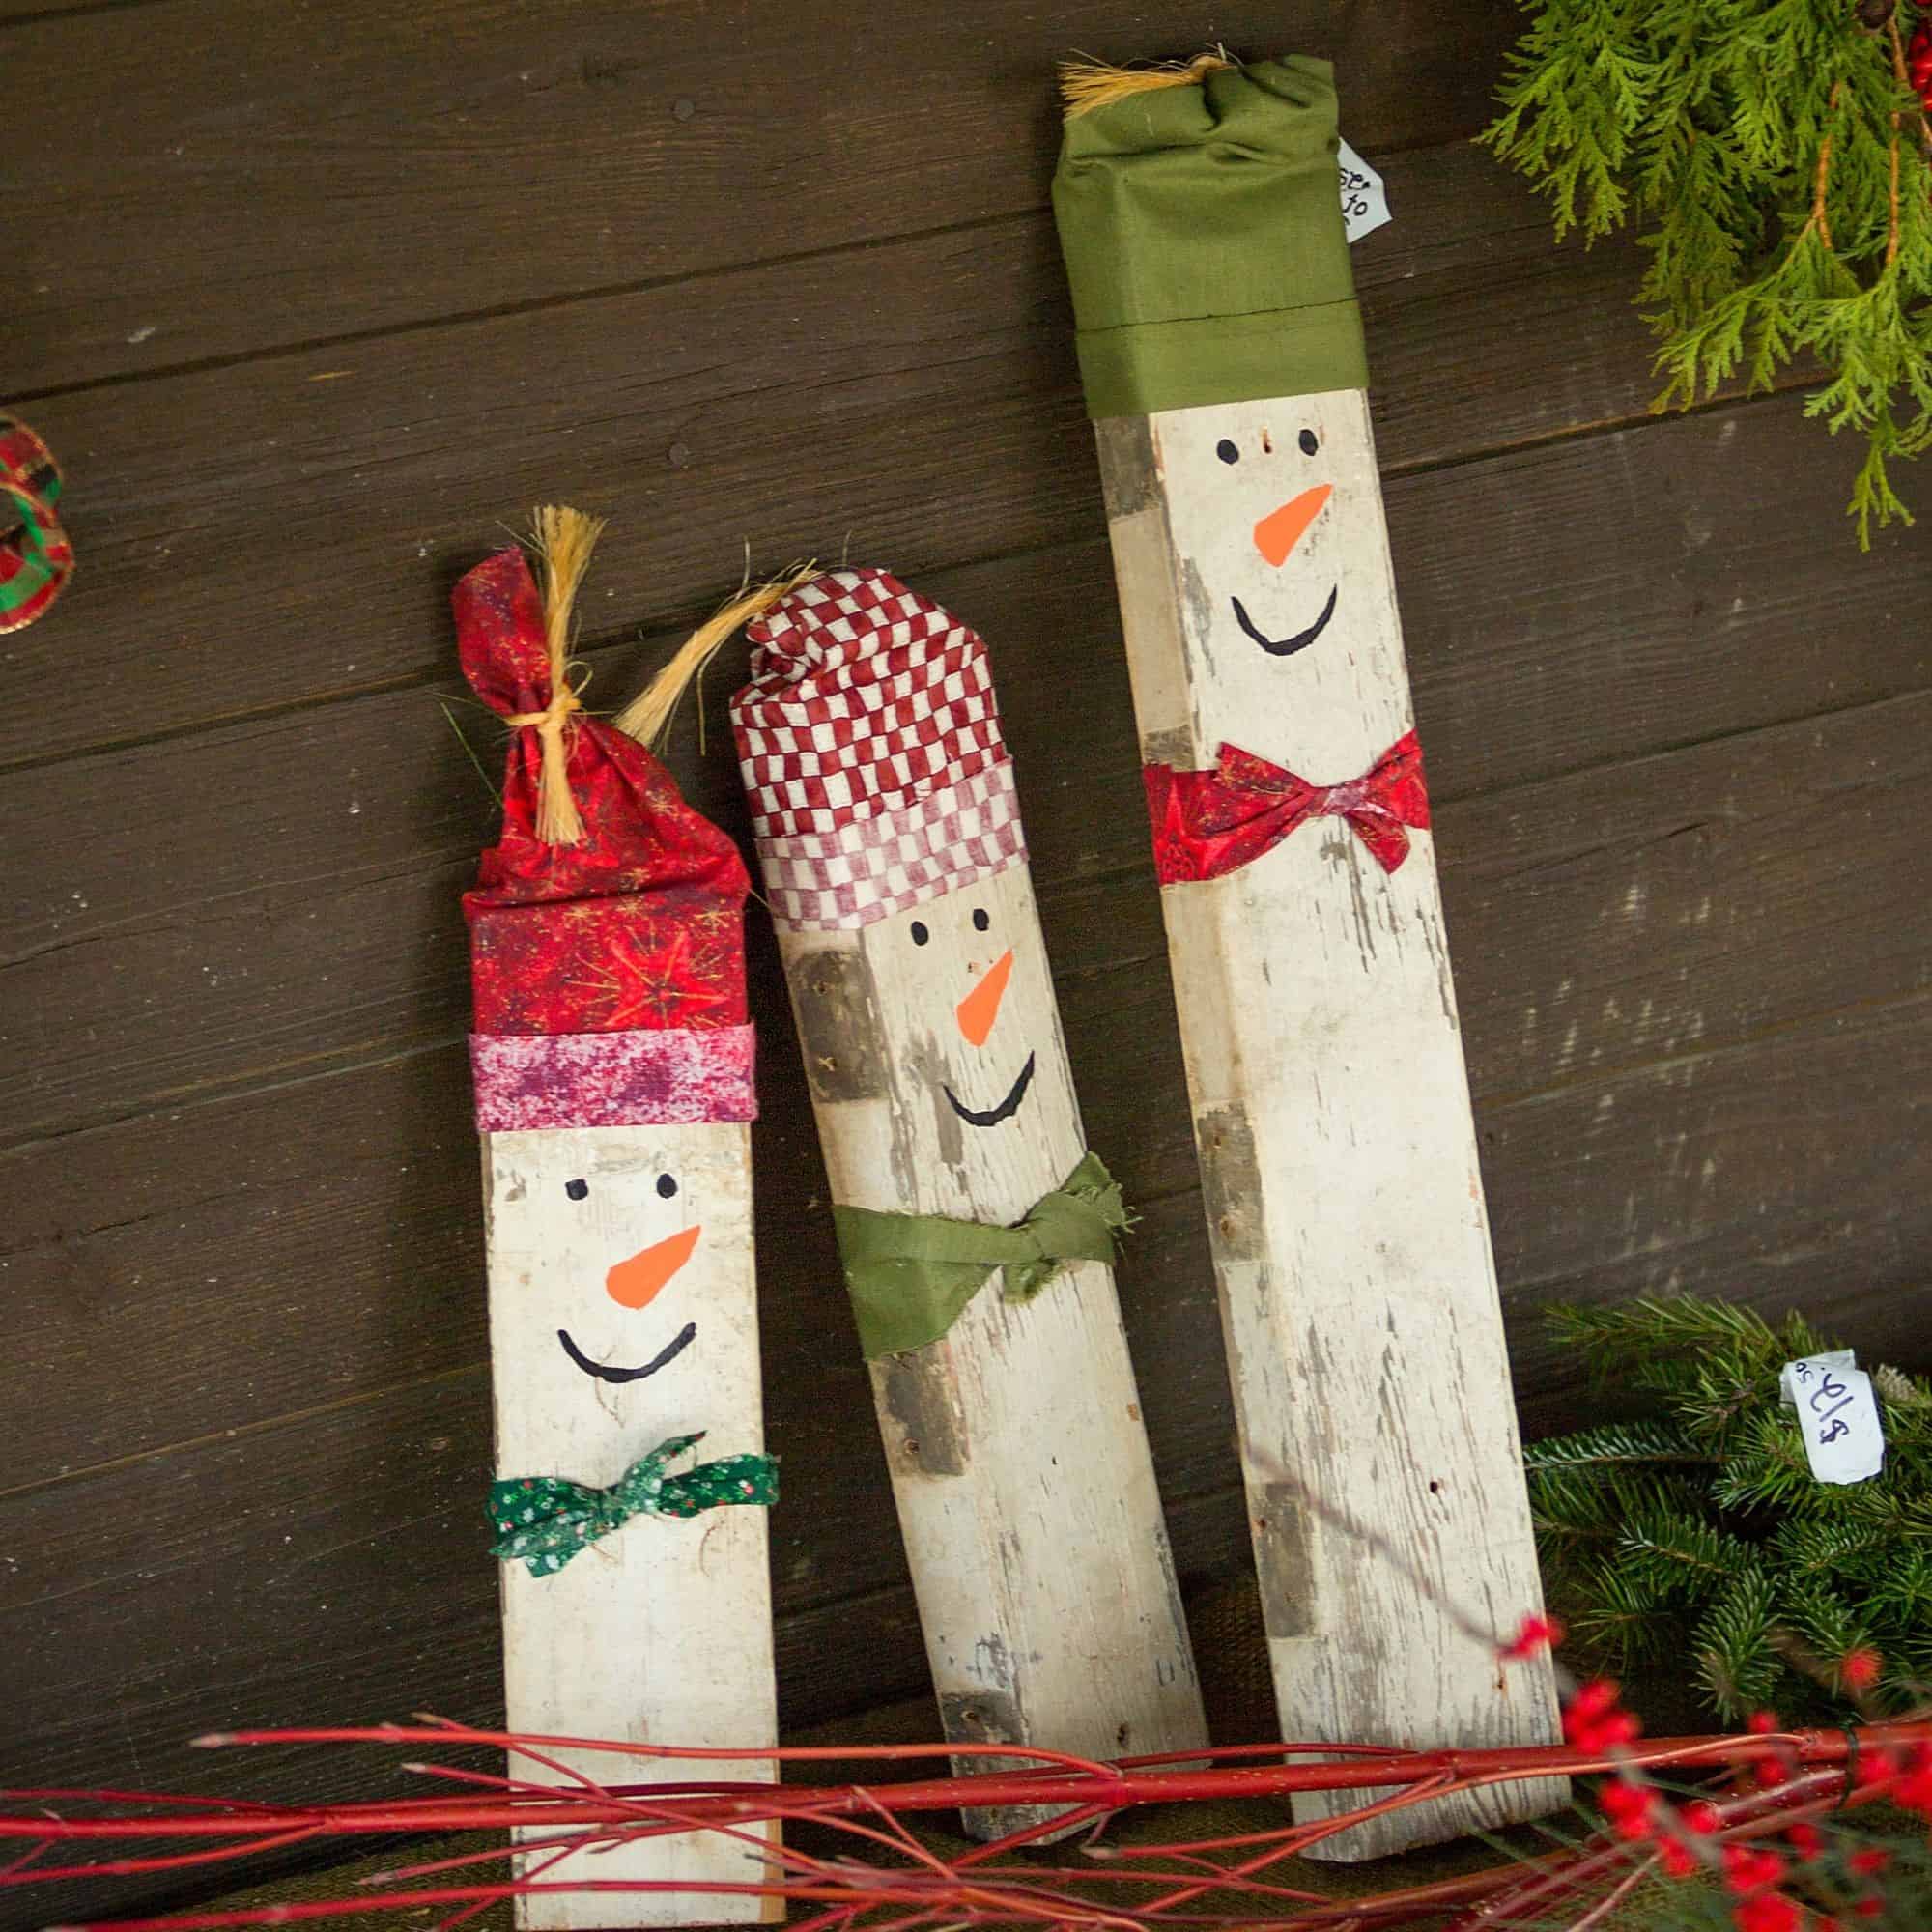 Snowman Crafts: 7 Easy Ways to Turn Anything Into a Snowman